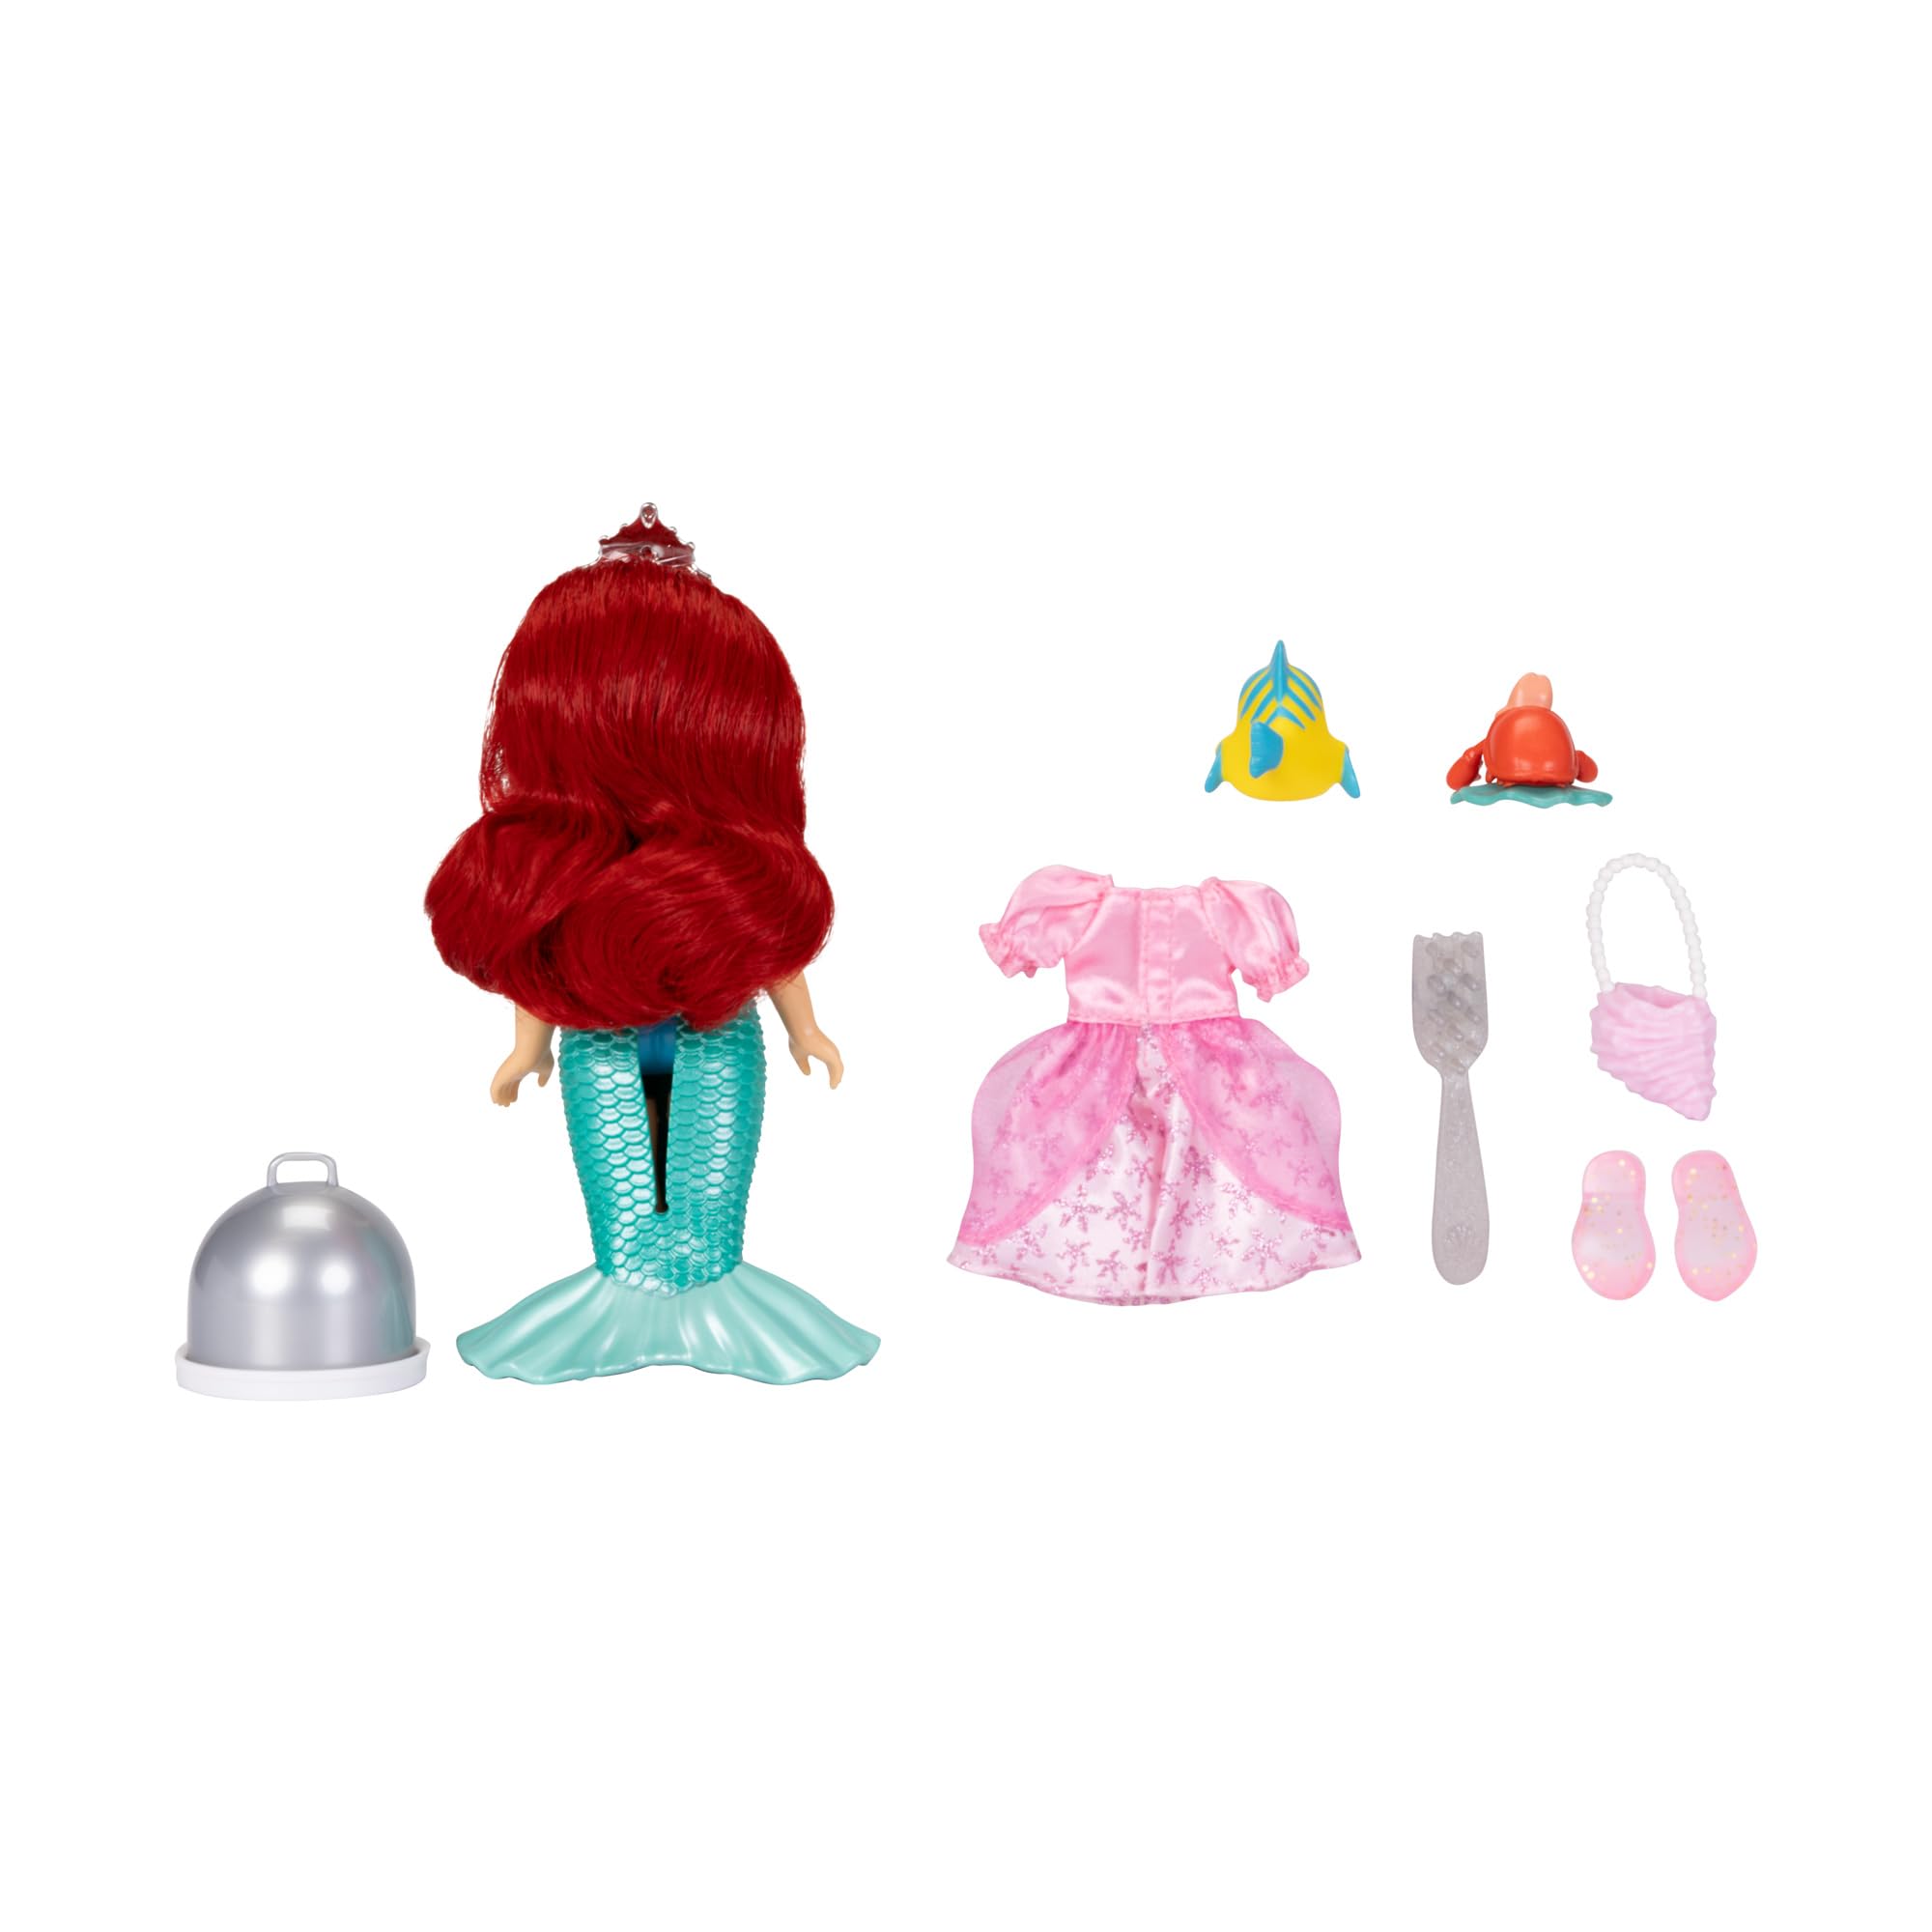 Disney Princess Ariel Doll Sea to Land Petite Ariel Doll with Sebastian & Flounder, in Mermaid Tail and Pink Dress Fashions